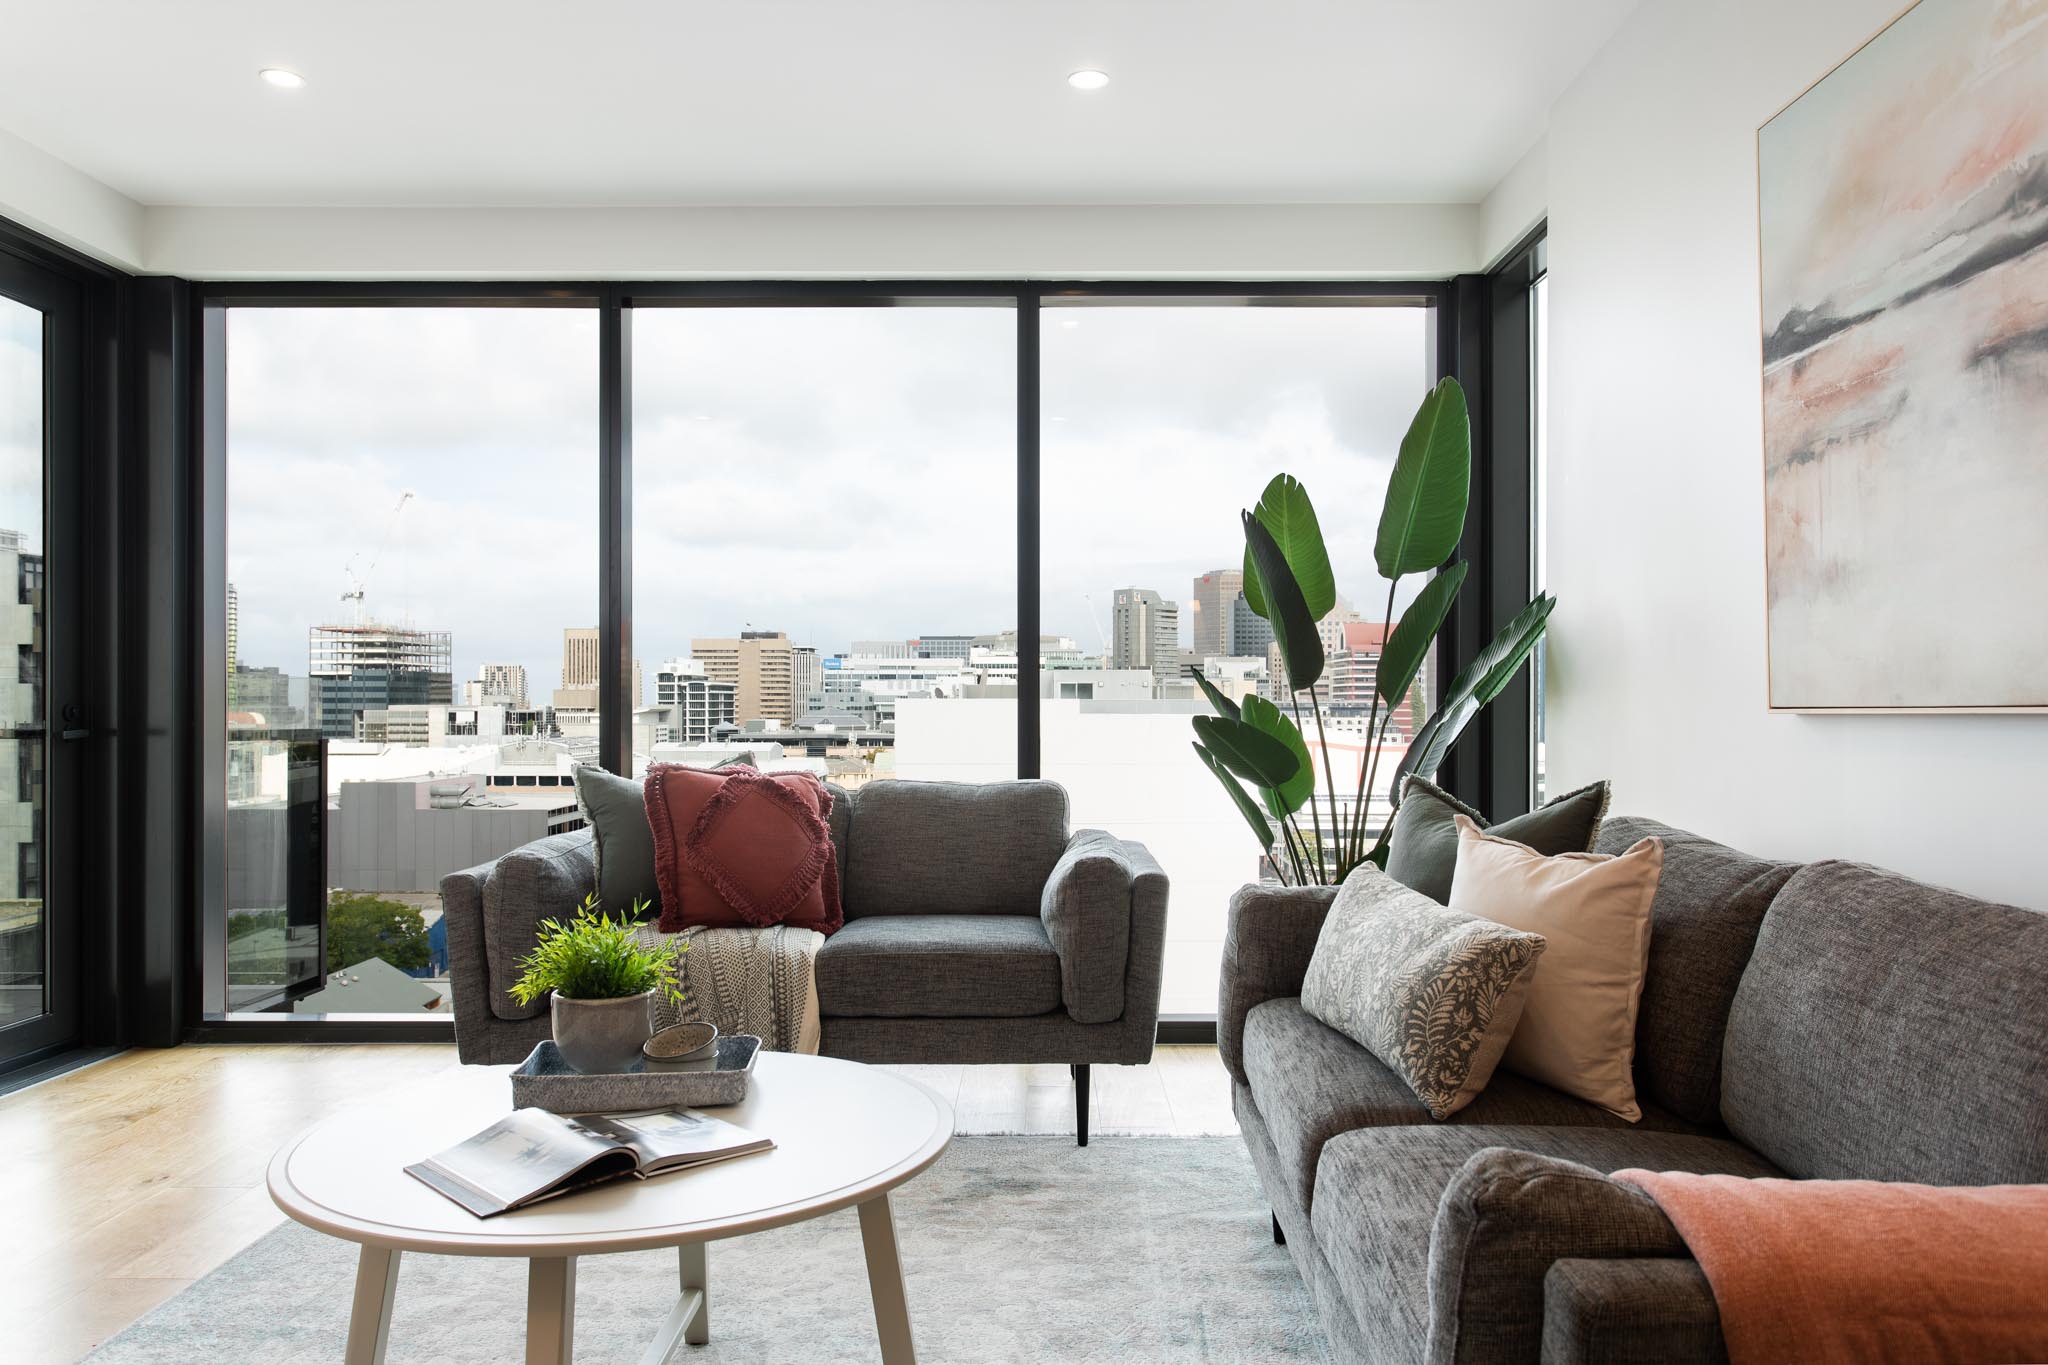 Living Room - East End Apartments - Adelaide - Urban Rest